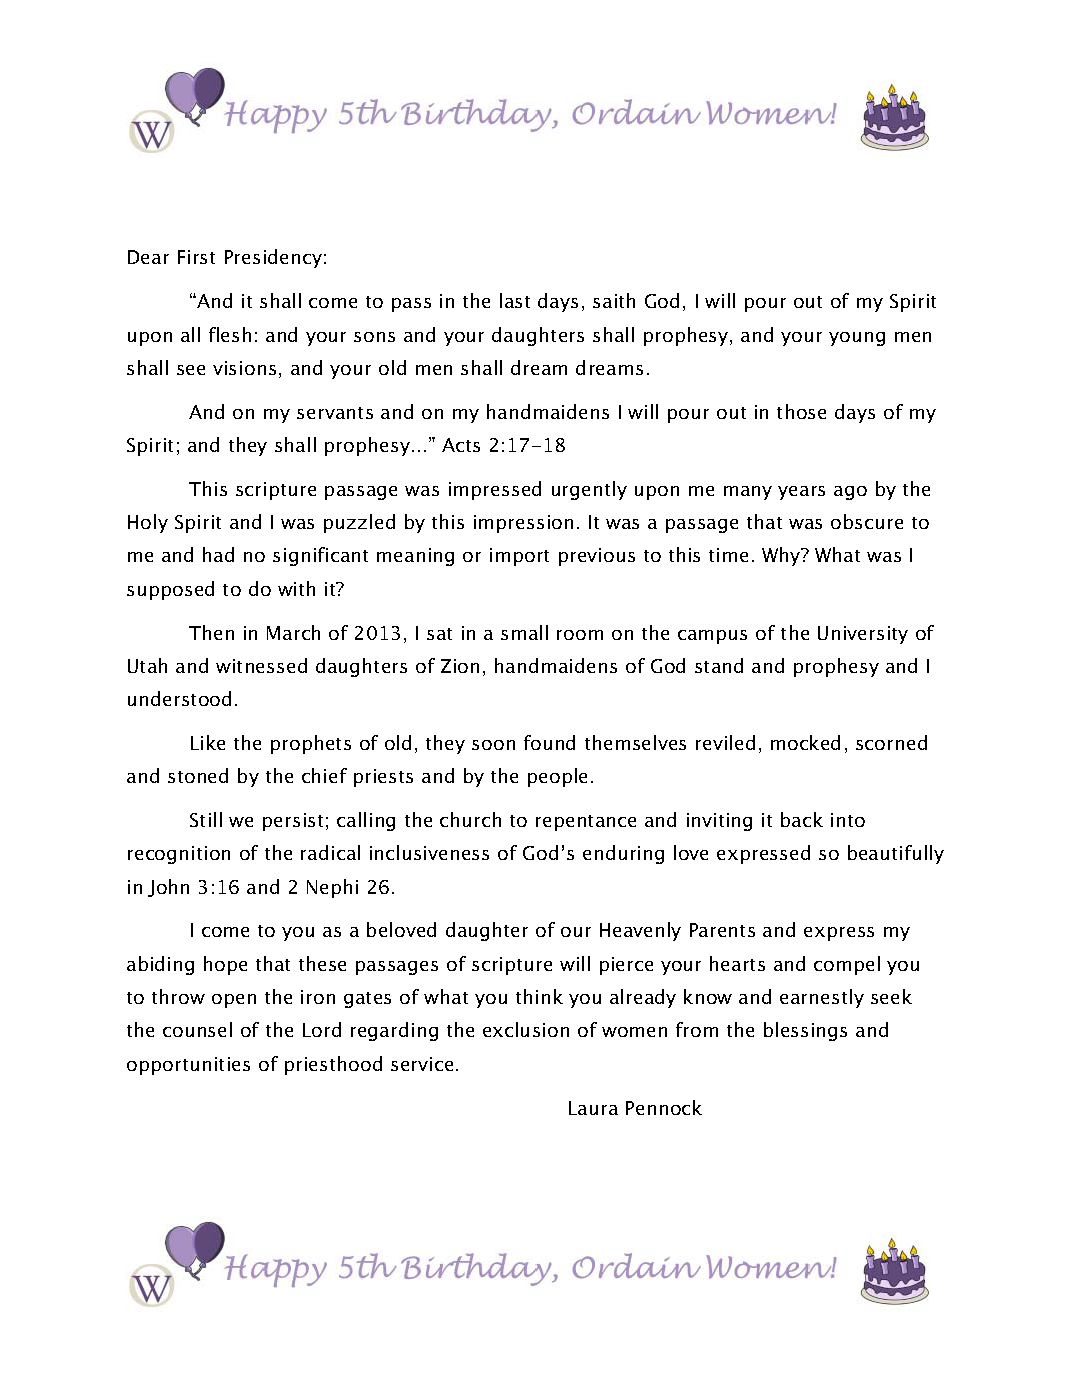 An image of Laura's letter to First Presidency. printed with the Ordain Women 5th birthday letterhead. The text of the letter is the text of this post.